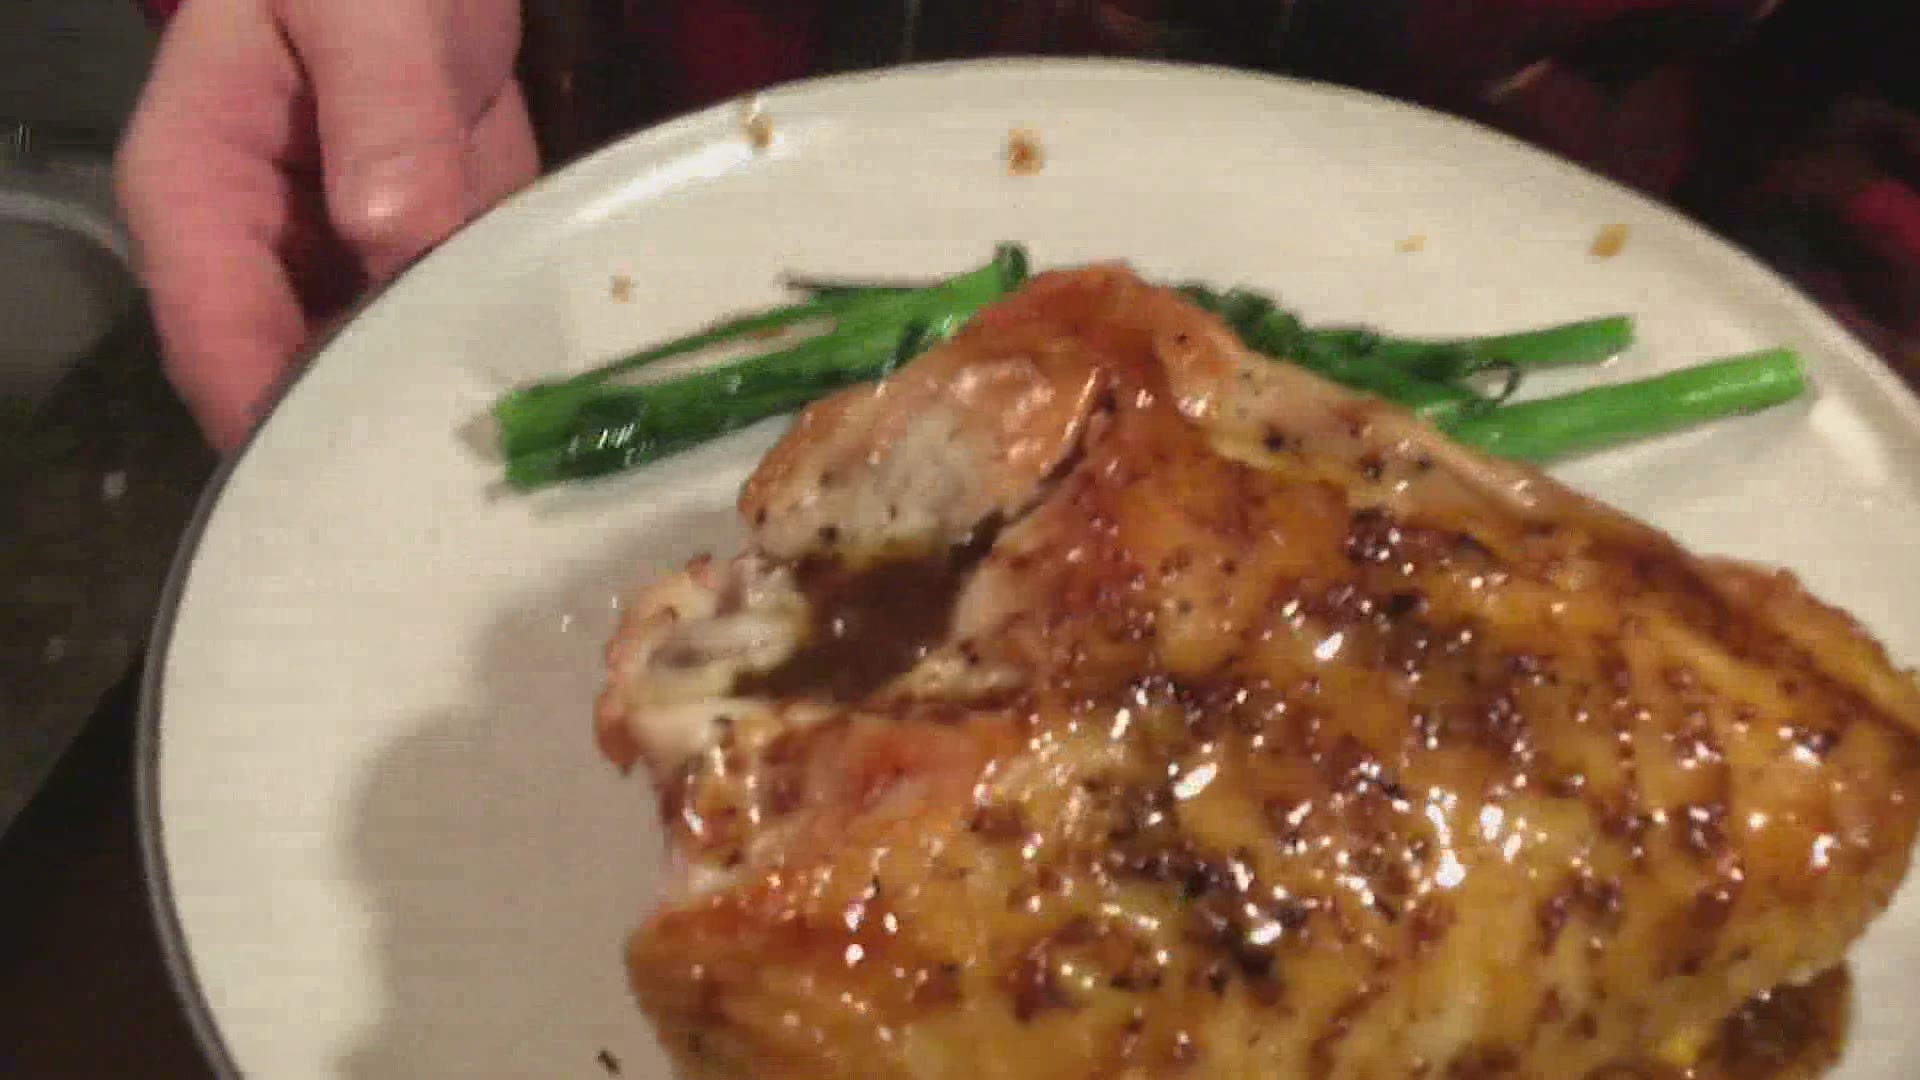 Chef Bo Byrnes shares his delicious glaze recipe that can be used on a number of dishes.